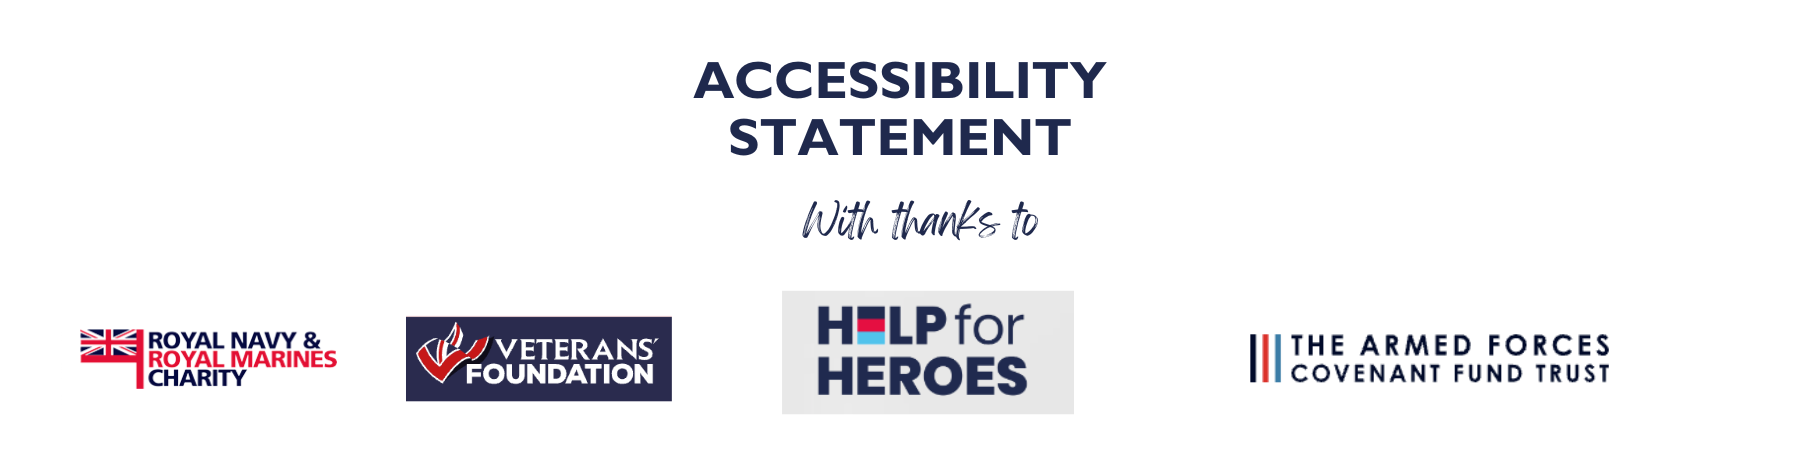 Accessibility statement hotel in portsmouth